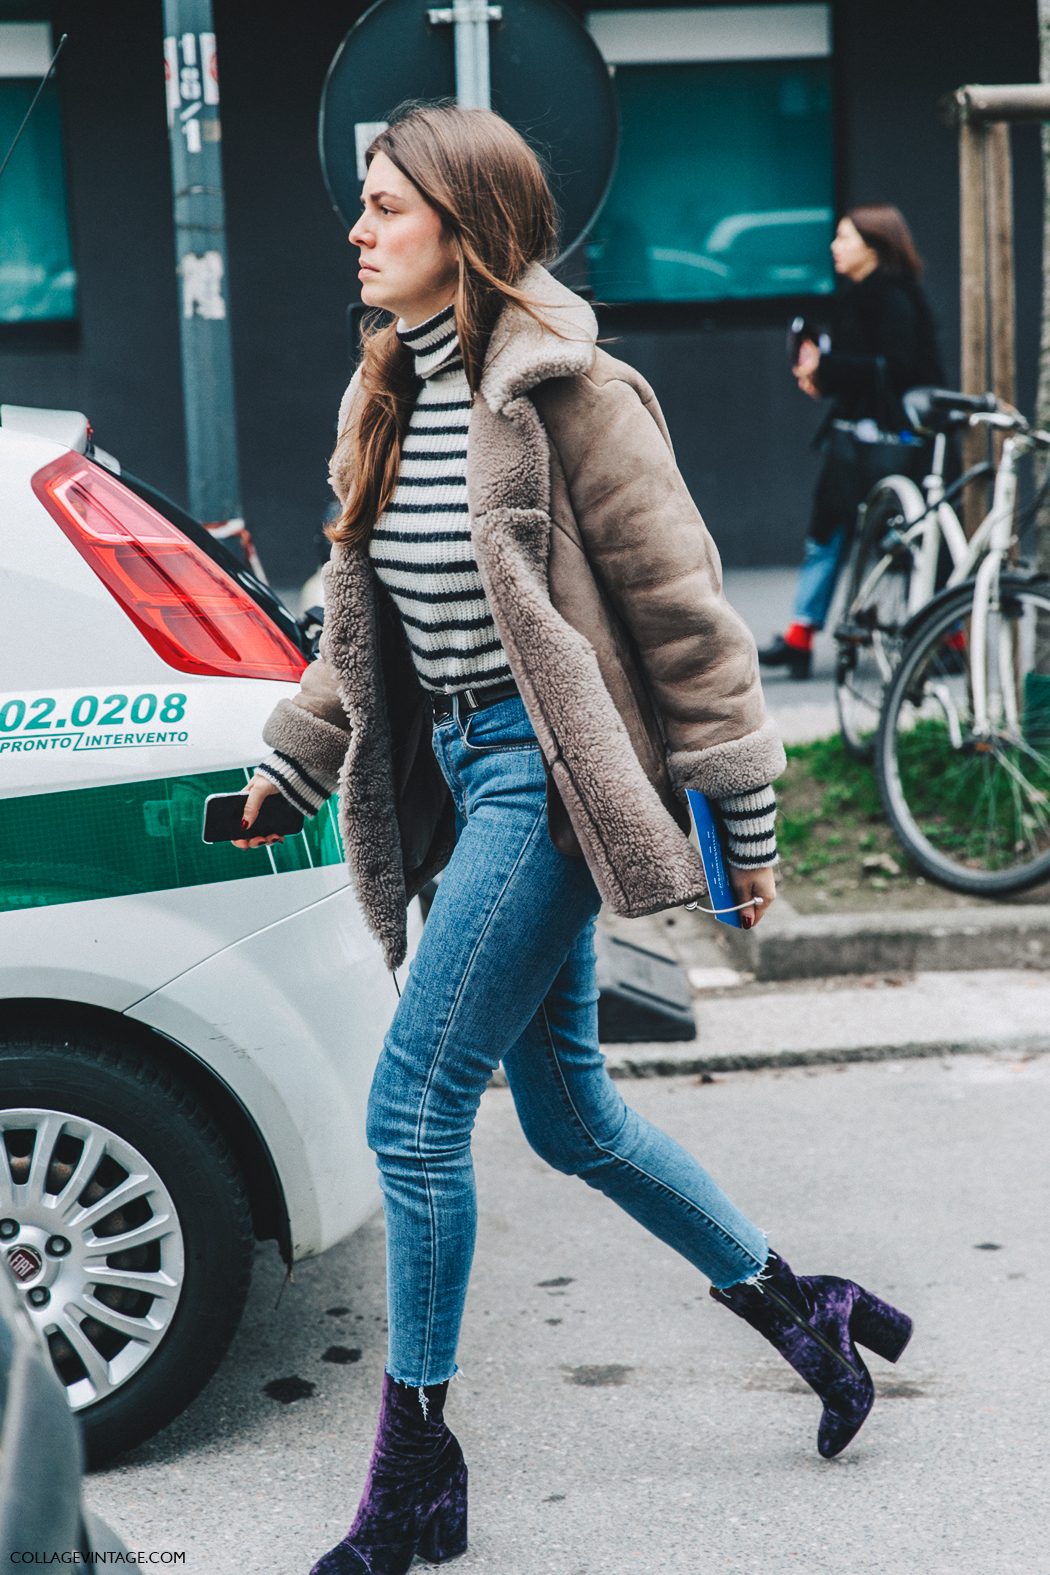 Milan_Fashion_Week_Fall_16-MFW-Street_Style-Collage_Vintage-Velvet_Boots-Shearling_Coat-